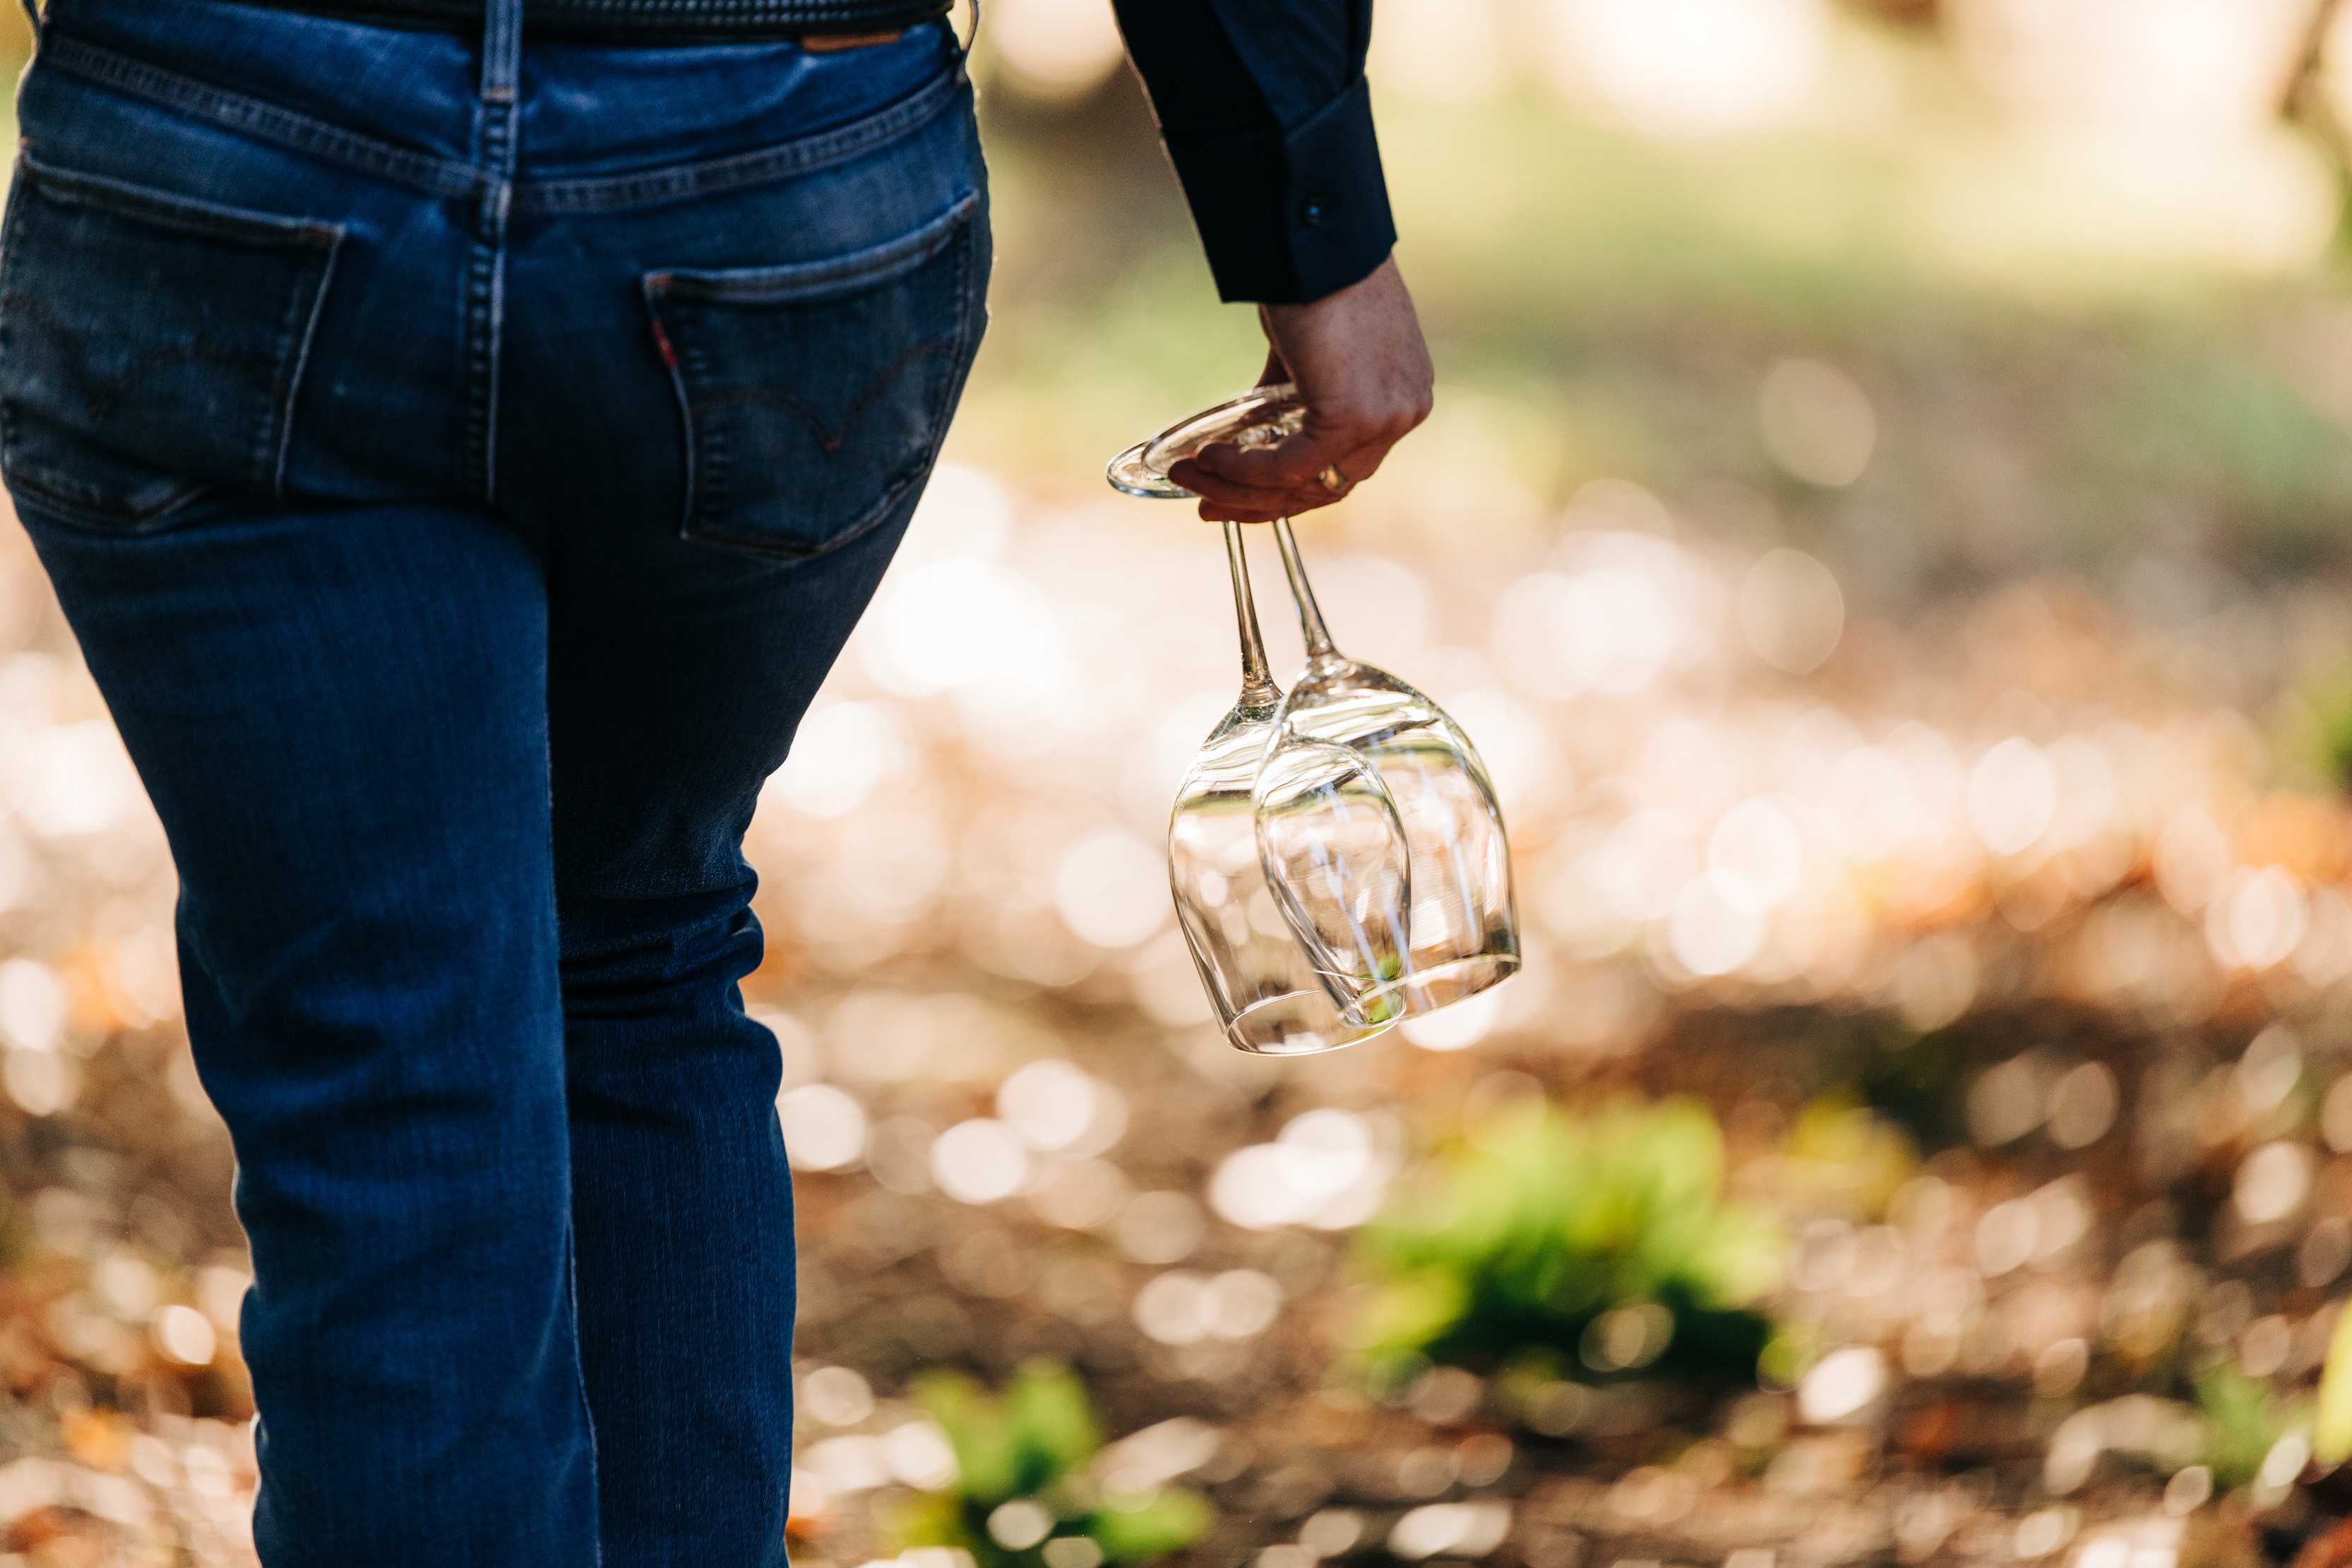 A member of staff carries two empty wine glasses upside down at Holm Oak Vineyards.